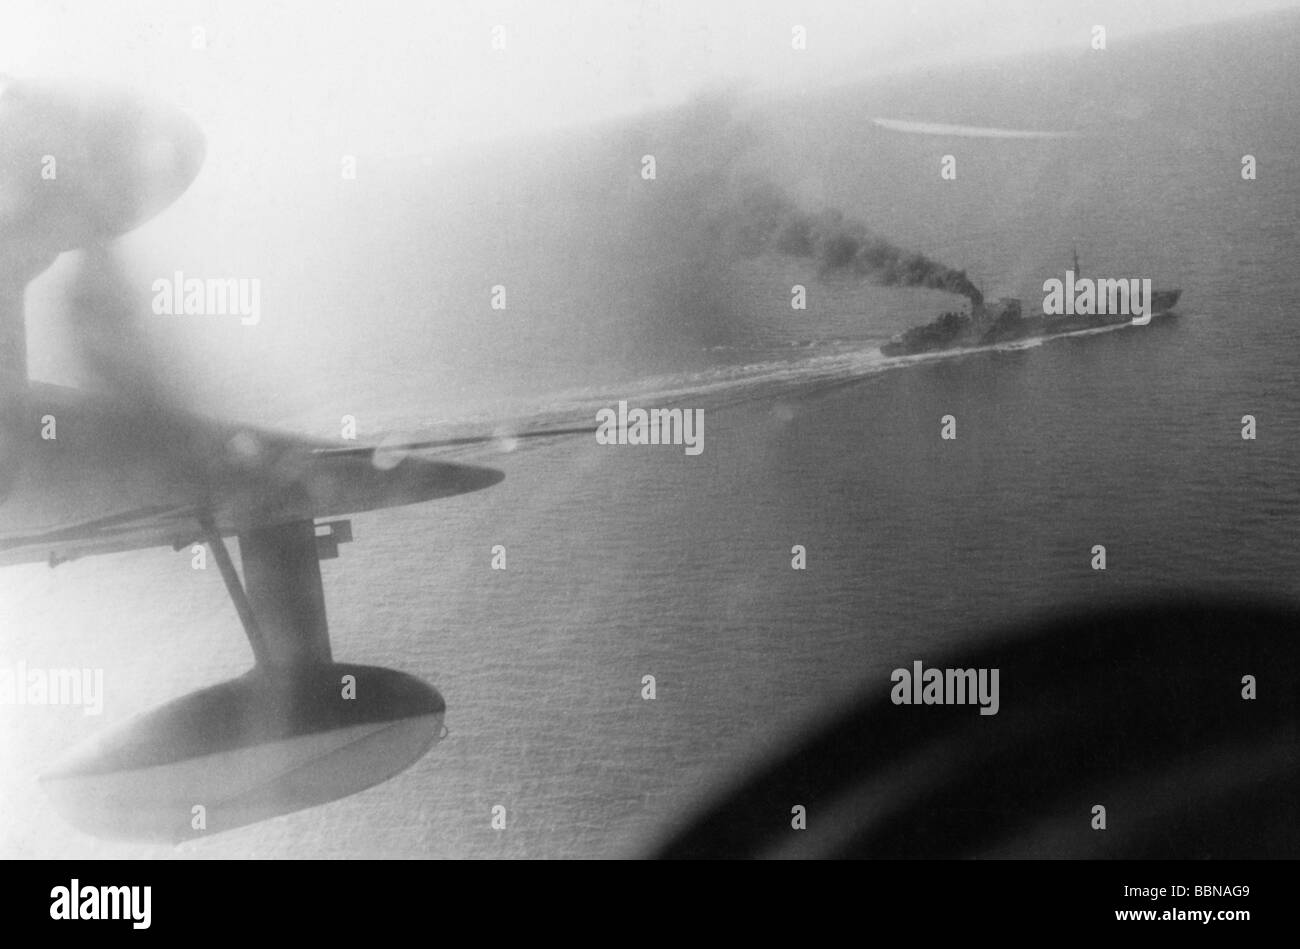 events, Second World War / WWII, Russia 1944 / 1945, Crimea, evacuation of Sevastopol, German or Rumanian ship in the Black Sea, aerial photo, early May 1944, taken from a flying boat Blohm & Voss BV 138, Eastern Front, USSR, Wehrmacht, retreat, transport, naval, sea, navy, Kriegsmarine, Soviet Union, 20th century, historic, historical, soldiers, ships, vessels, vessel, Romanian, plane, planes, Wehrmacht, Luftwaffe, Third Reich, recce, long-range, boats, BV138, BV-138, maritime reconnaissance aircraft, wing, 1940s, Stock Photo